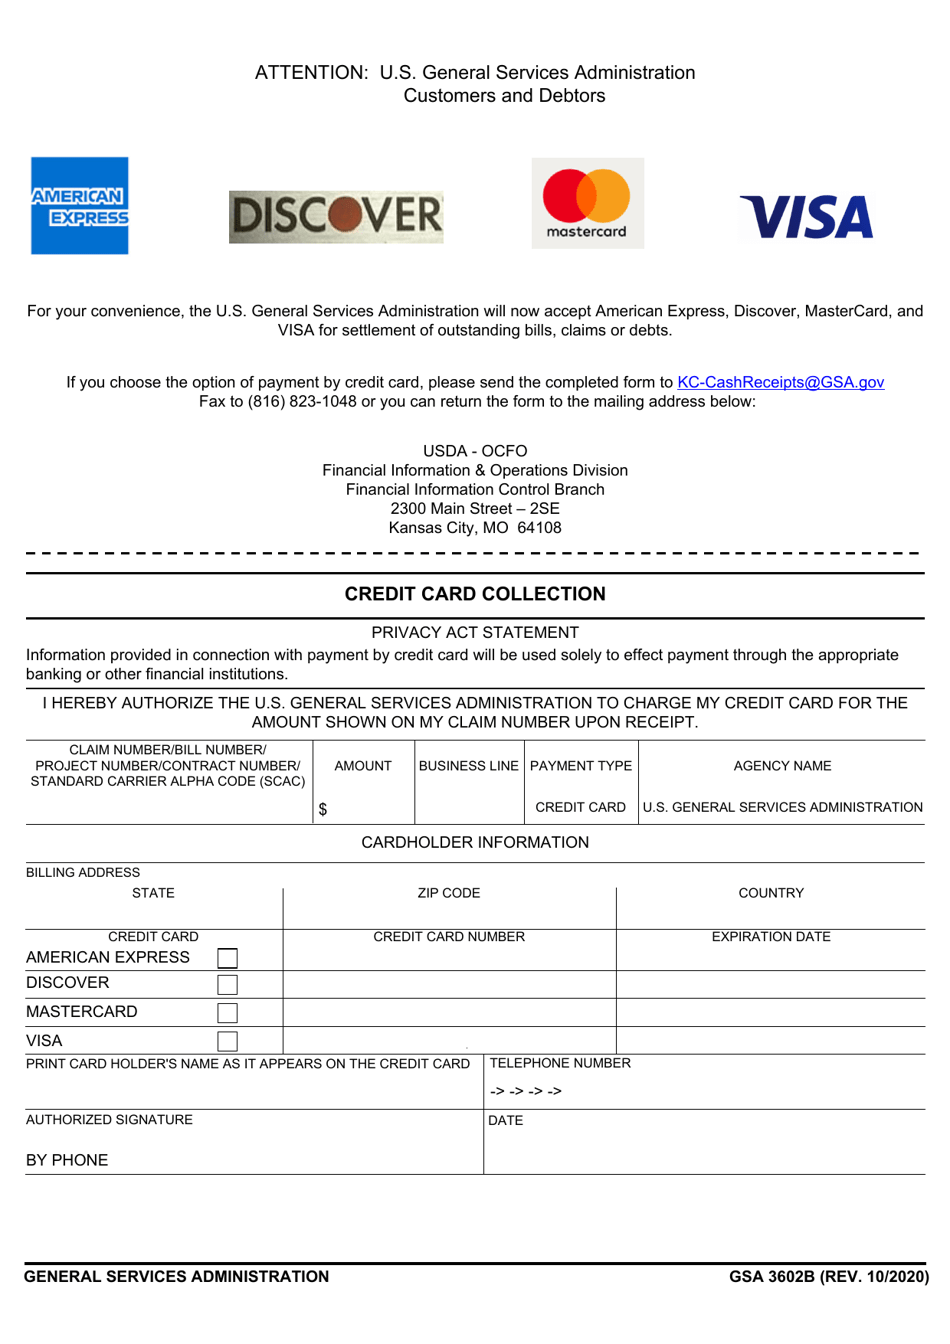 GSA Form 3602B Credit Card Collection, Page 1